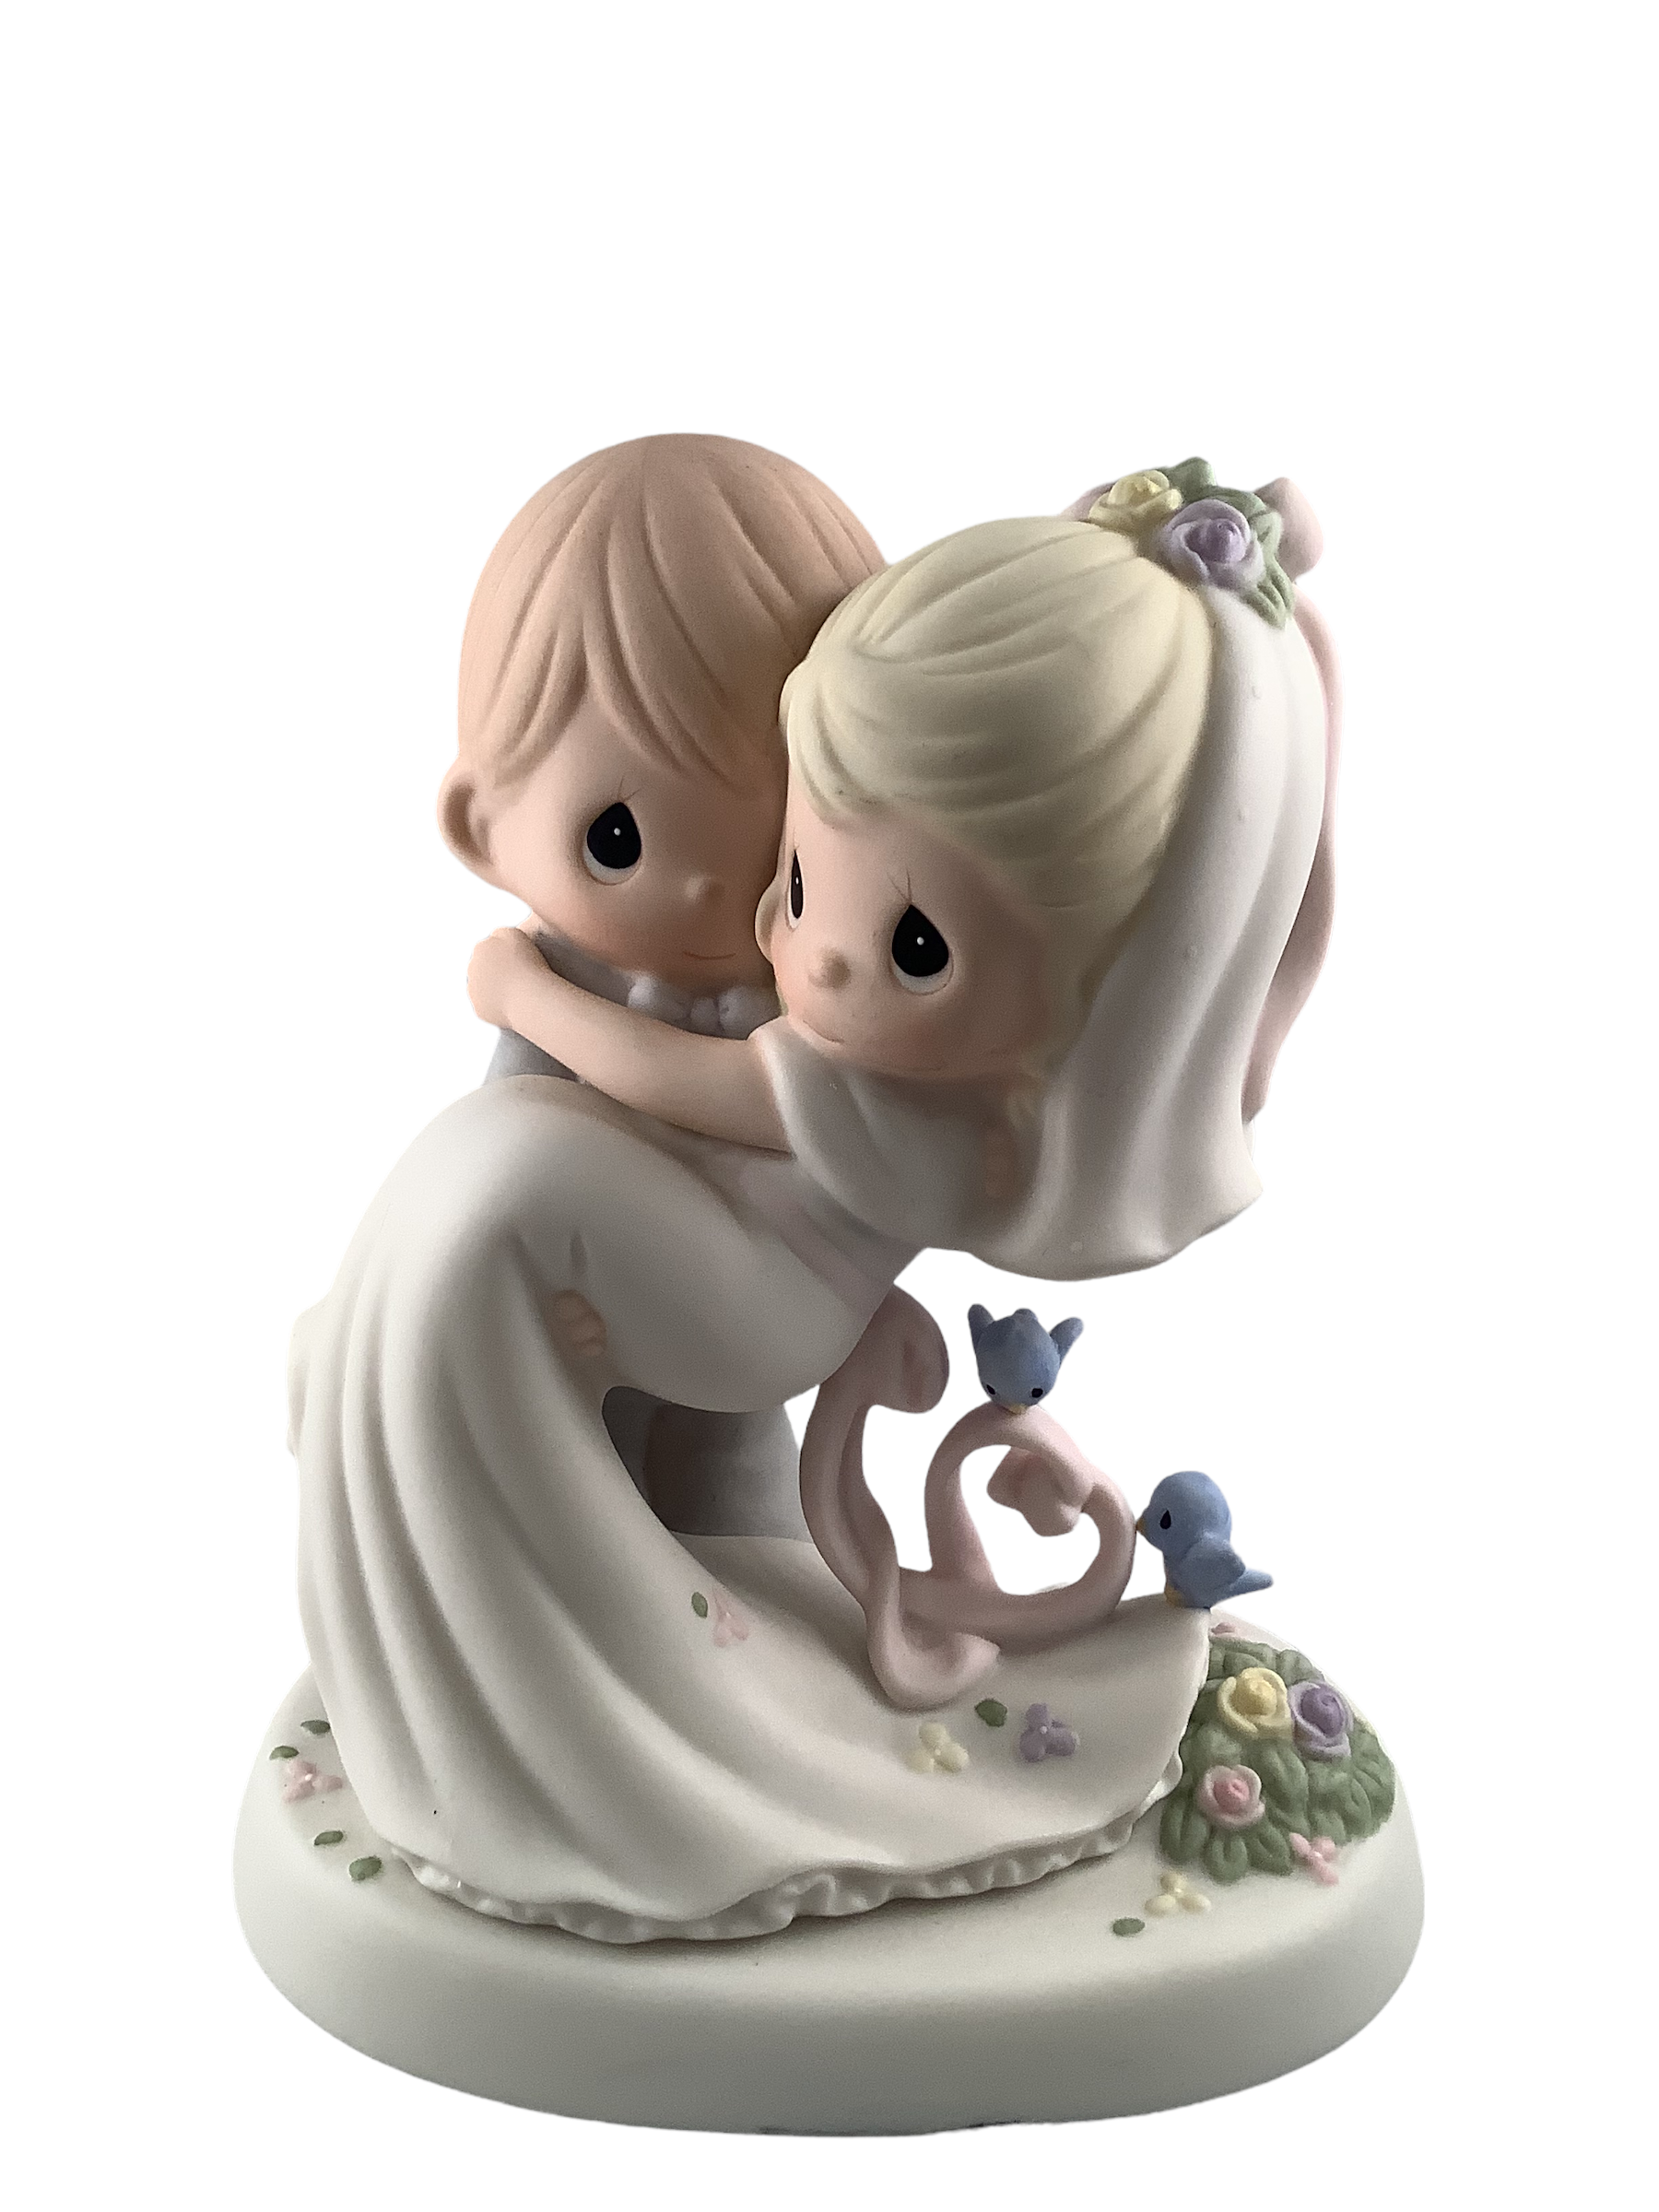 To Have And To Hold - Precious Moment Figurine